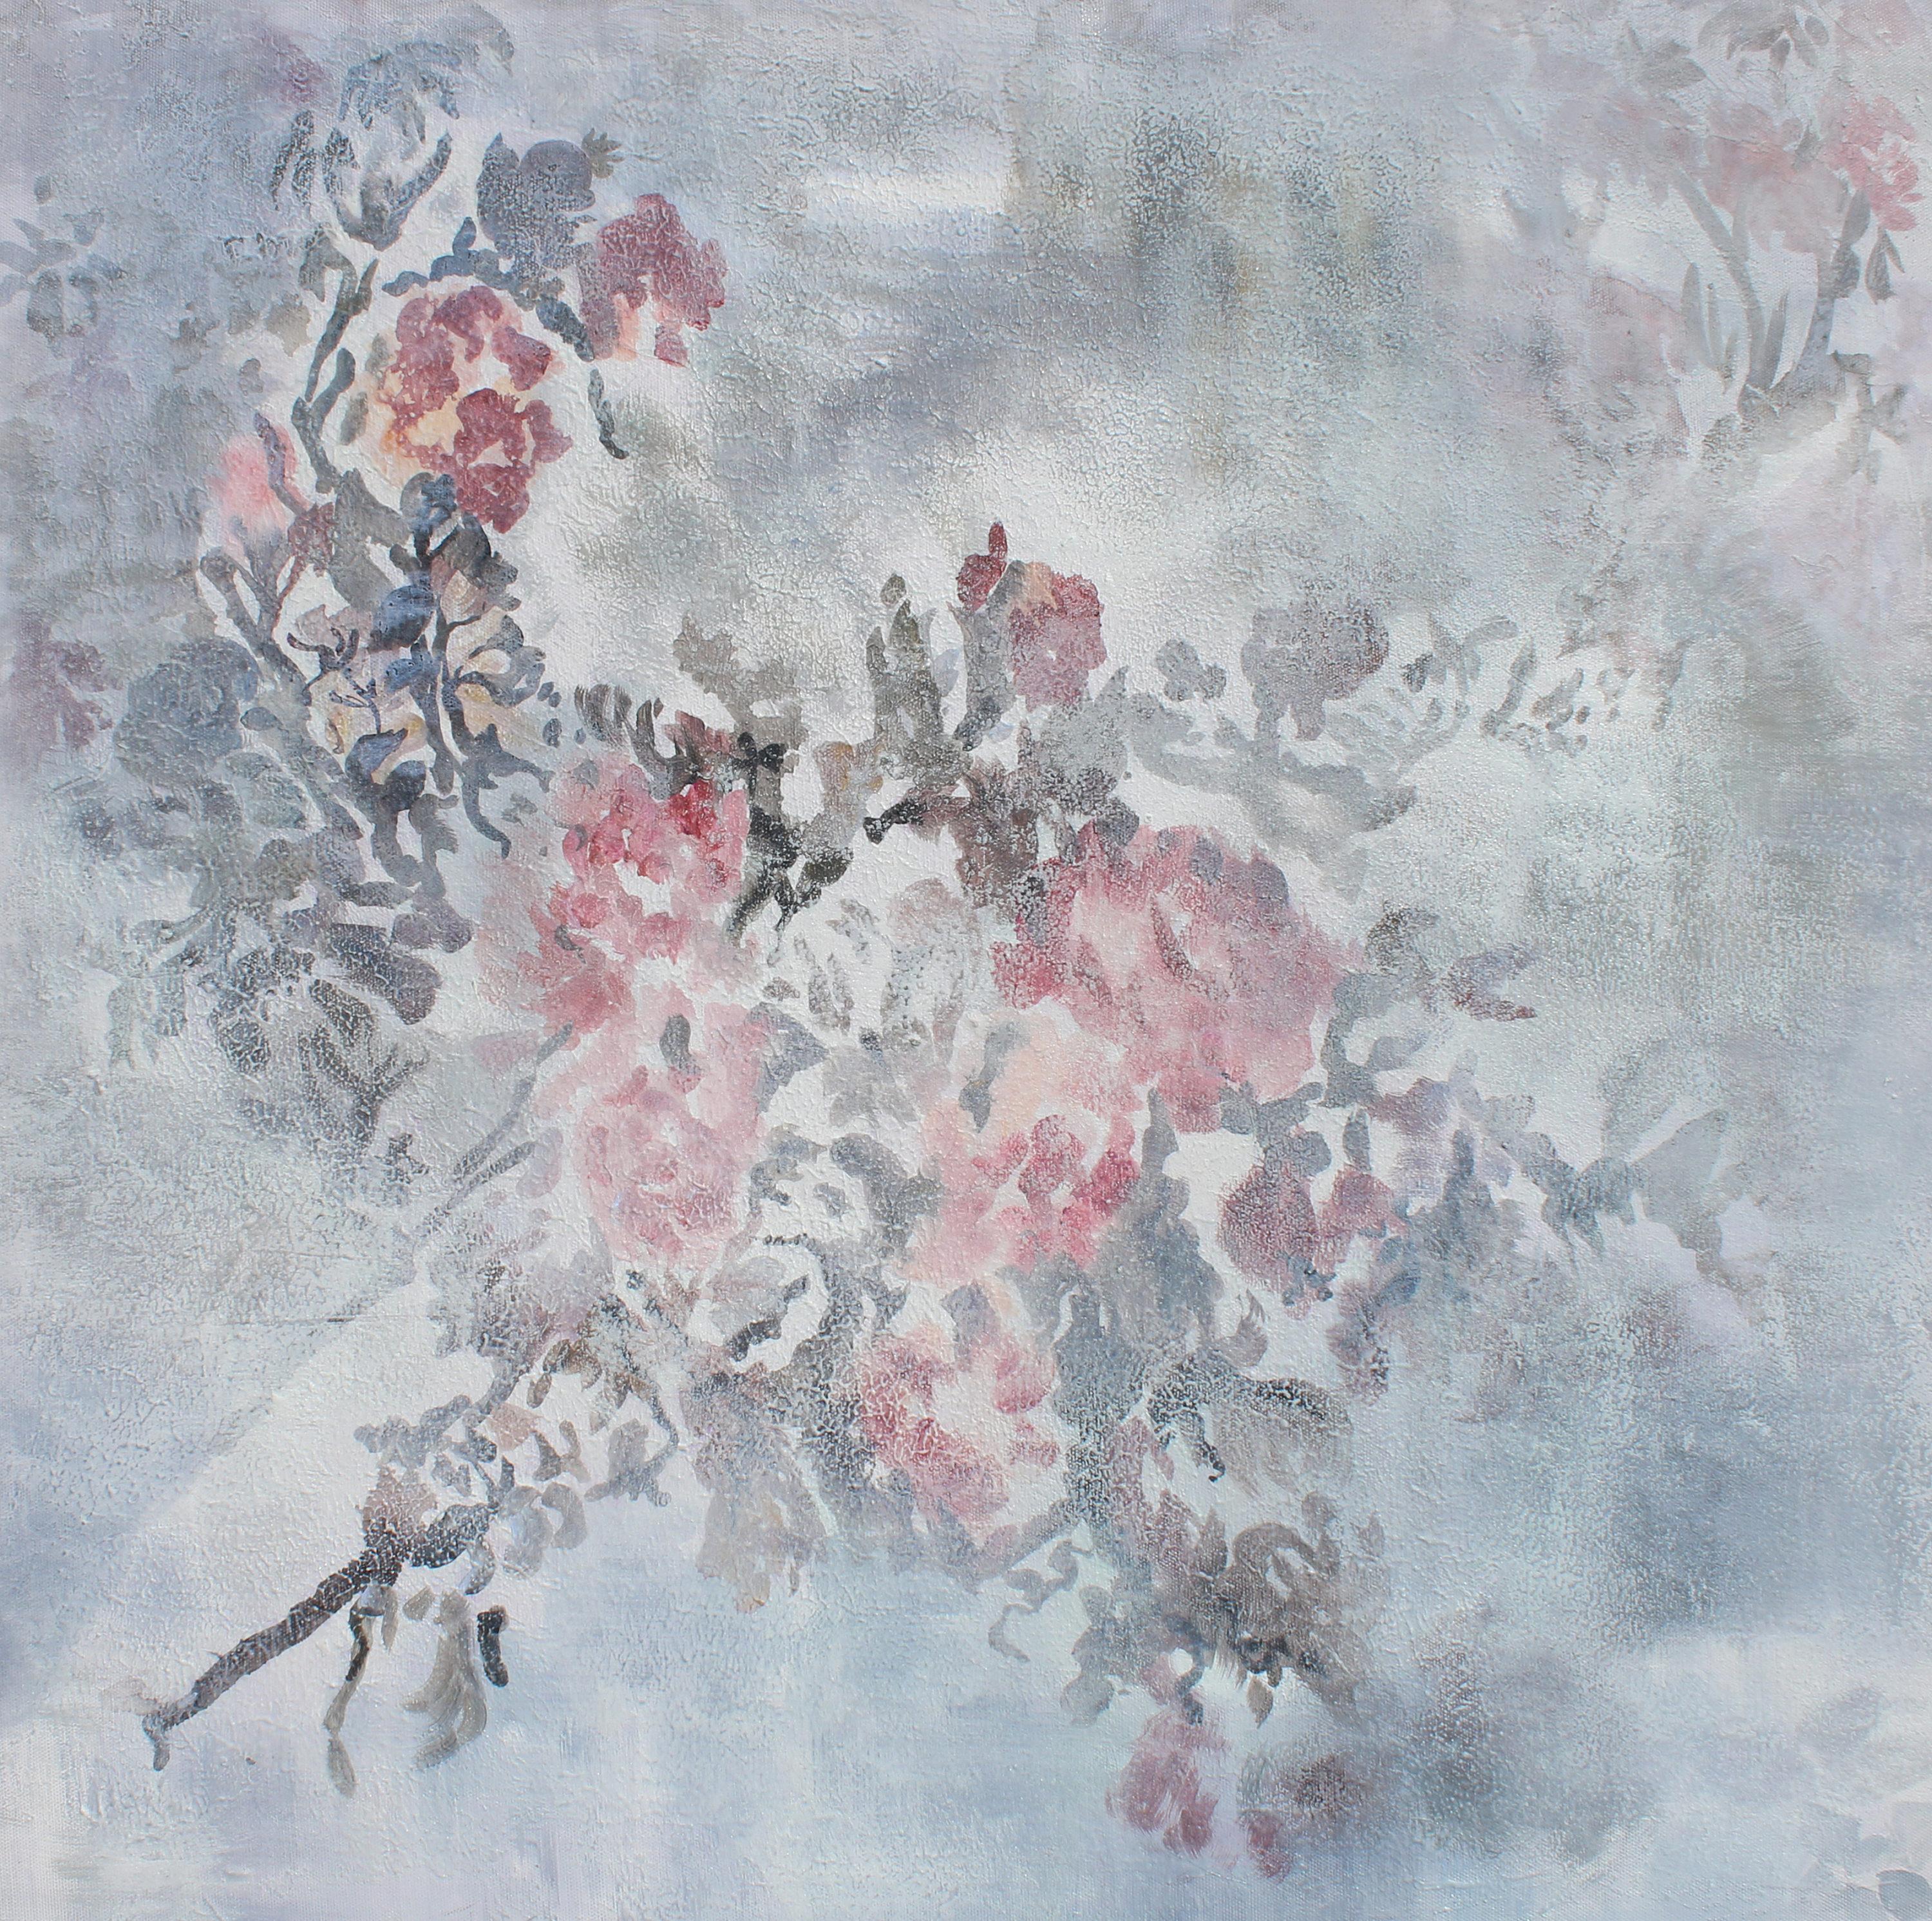 Irena Orlov Interior Painting - Shabby Chic Floral Textured Painting on Canvas 24 X 24" Roses, Softly